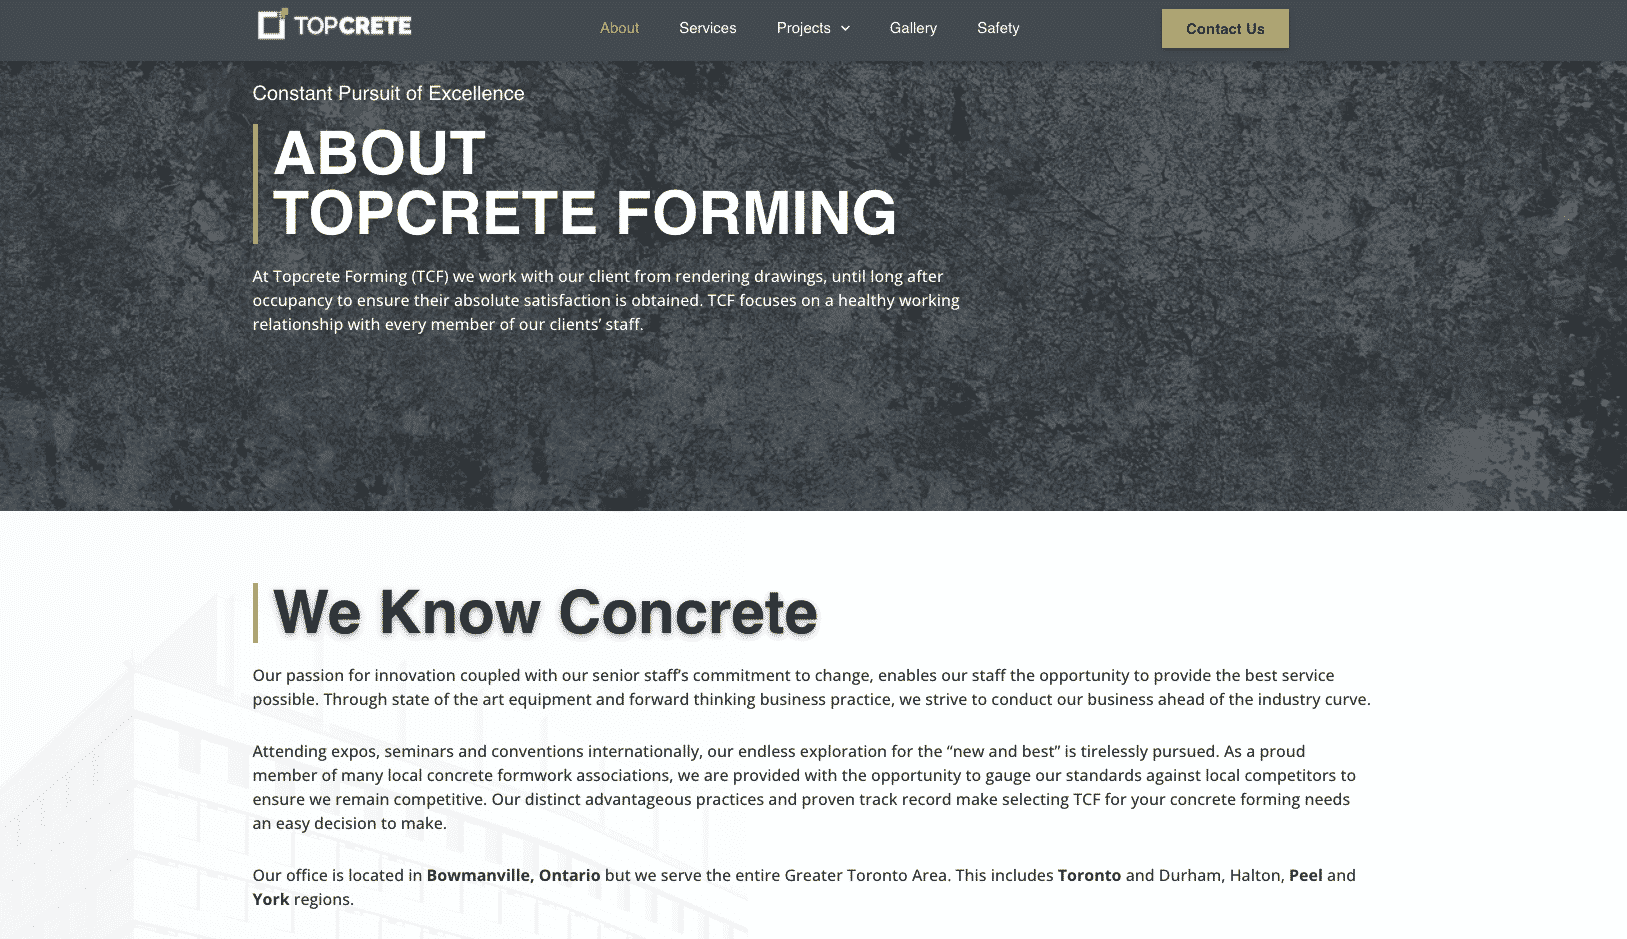 Imperium designed website for Topcrete. Note the clear wording, and easy to understand about us page.